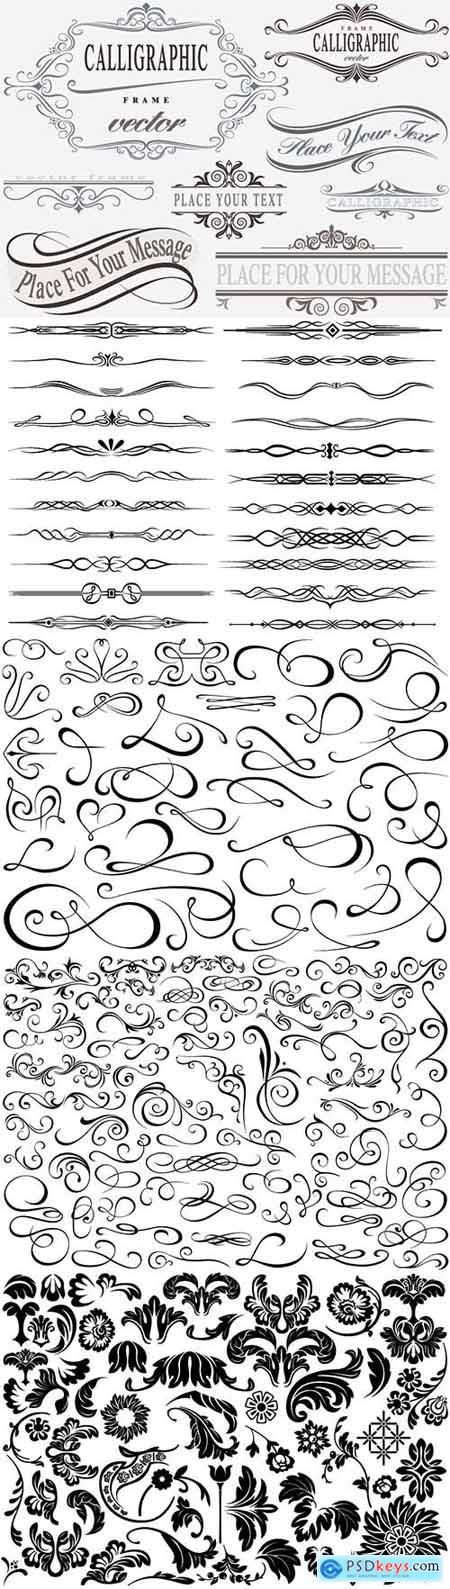 Vector graphic elements in calligraphic or floral design